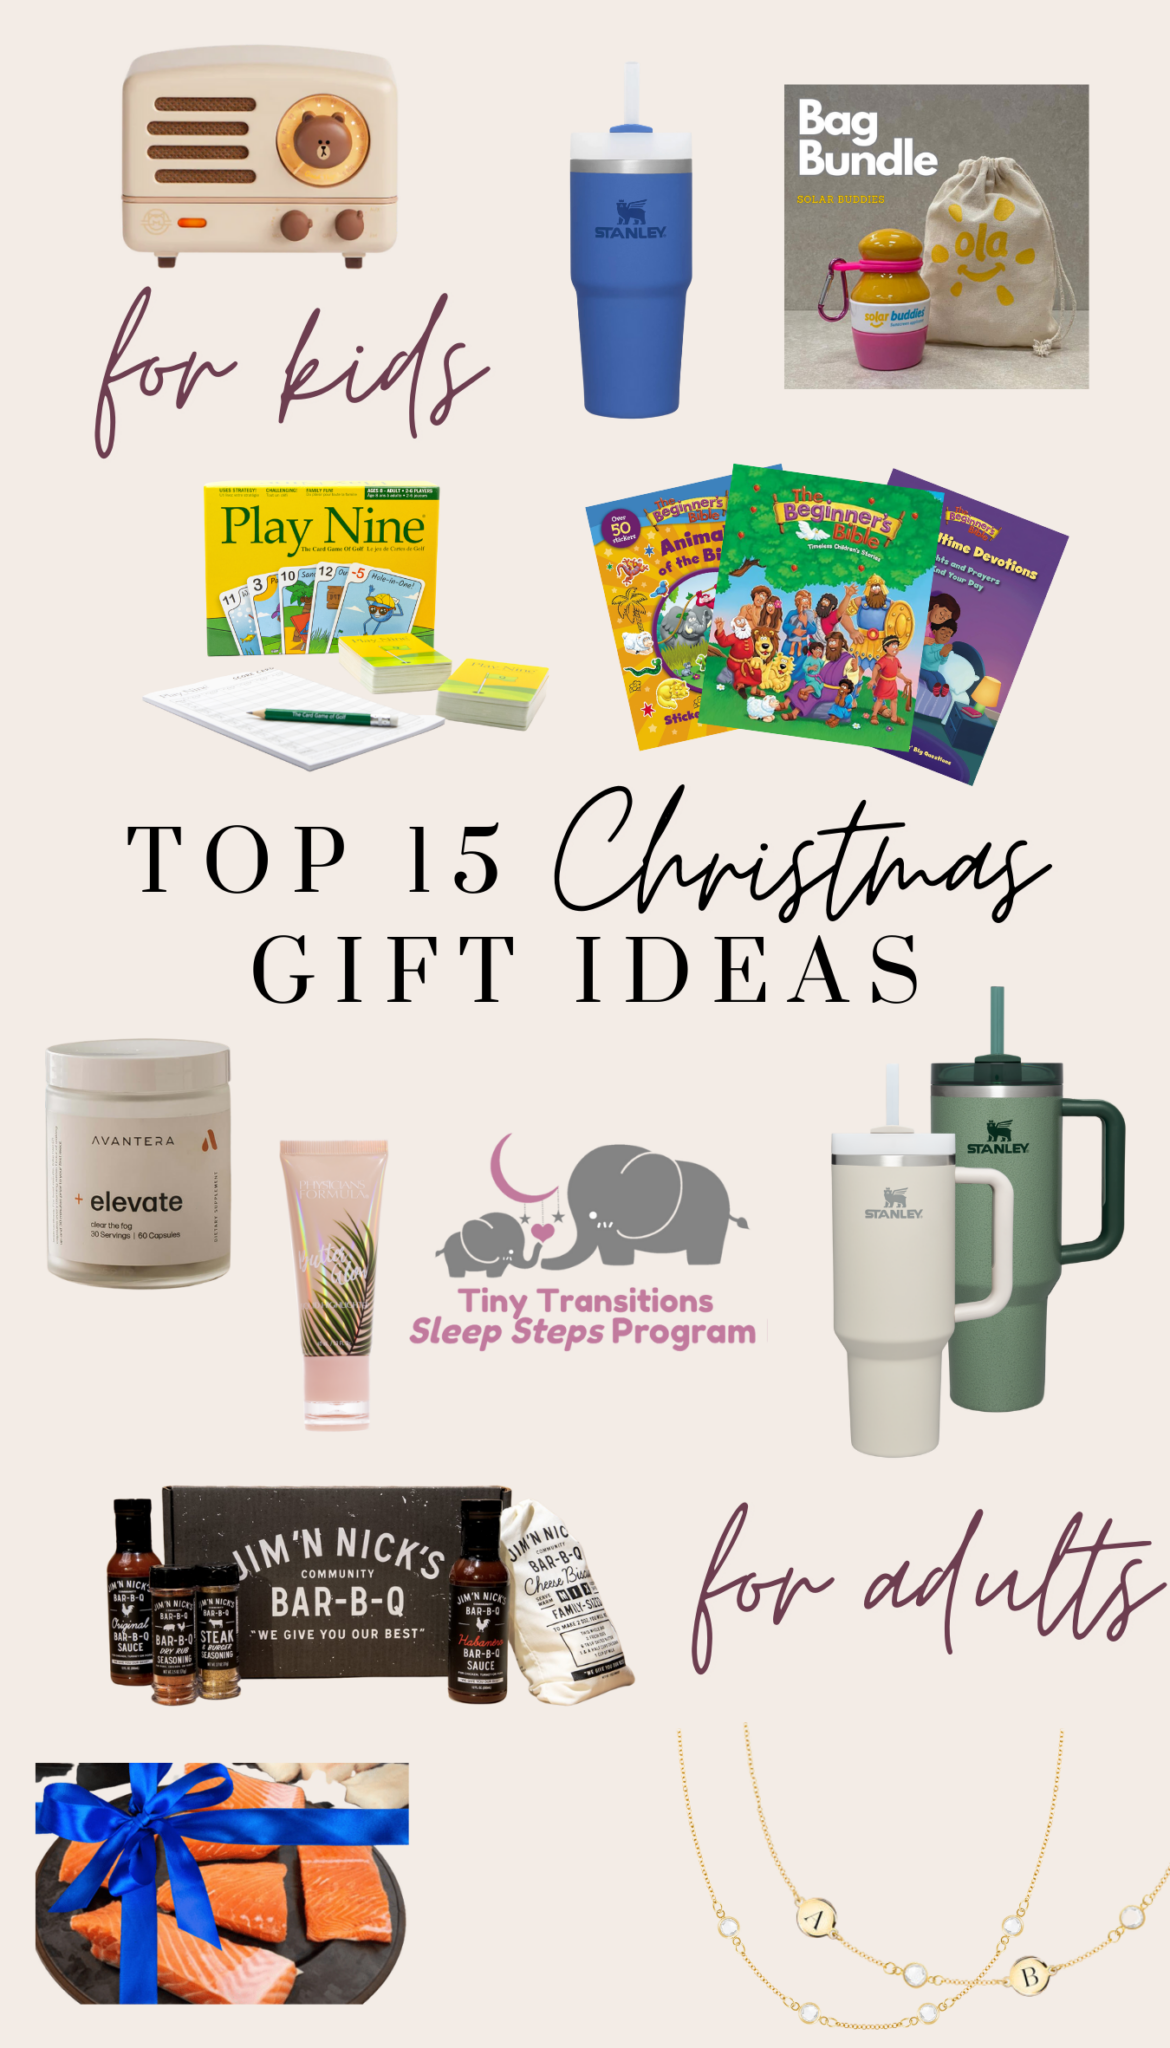 Christian Birmingham podcaster & health coach, Heather Brown, shares the best gift ideas for boy moms for Christmas.